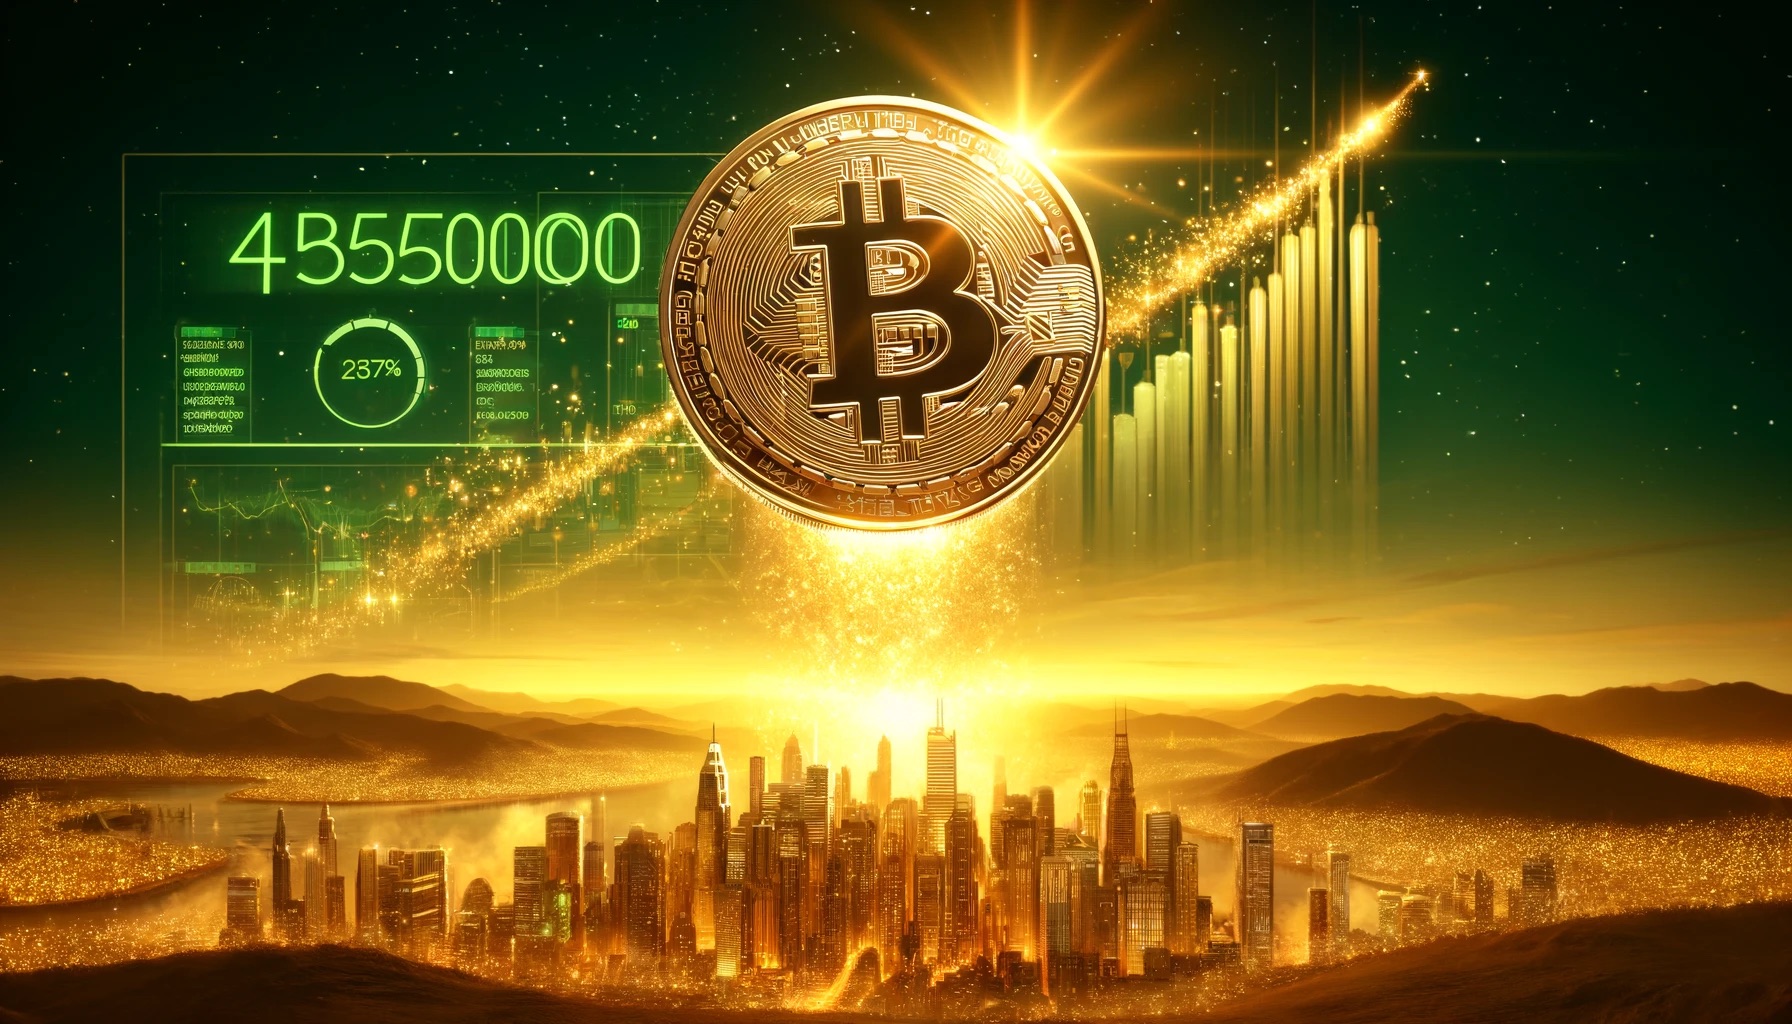 Bitcoin Gets Massive $500,000 Price Tag From Billionaire, Heres Why